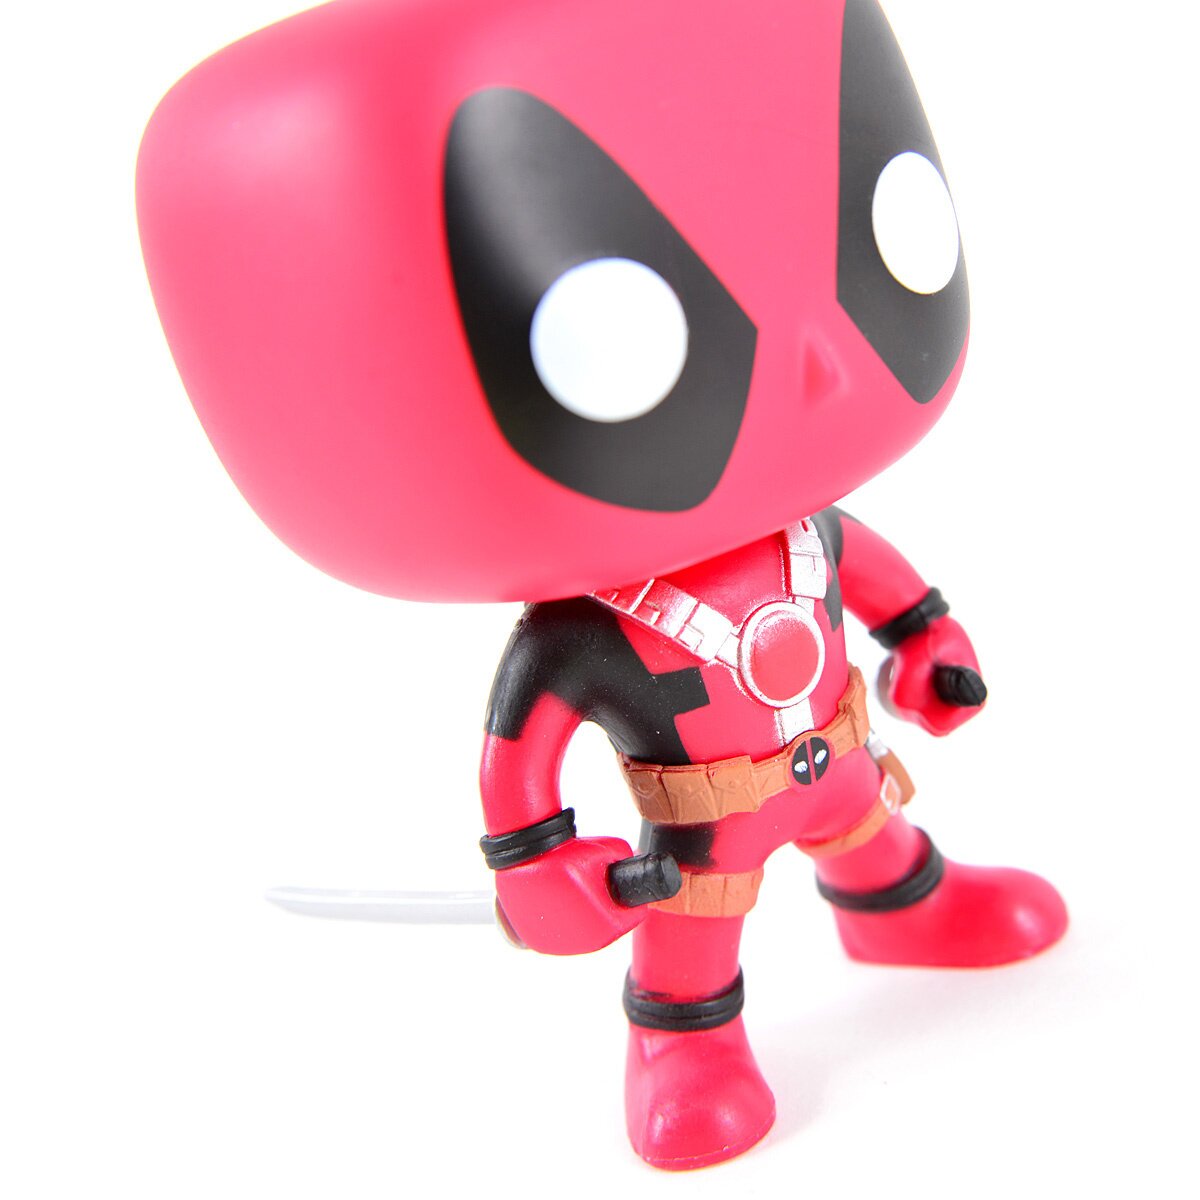 Buy Pop! Deadpool with Two Swords at Funko.